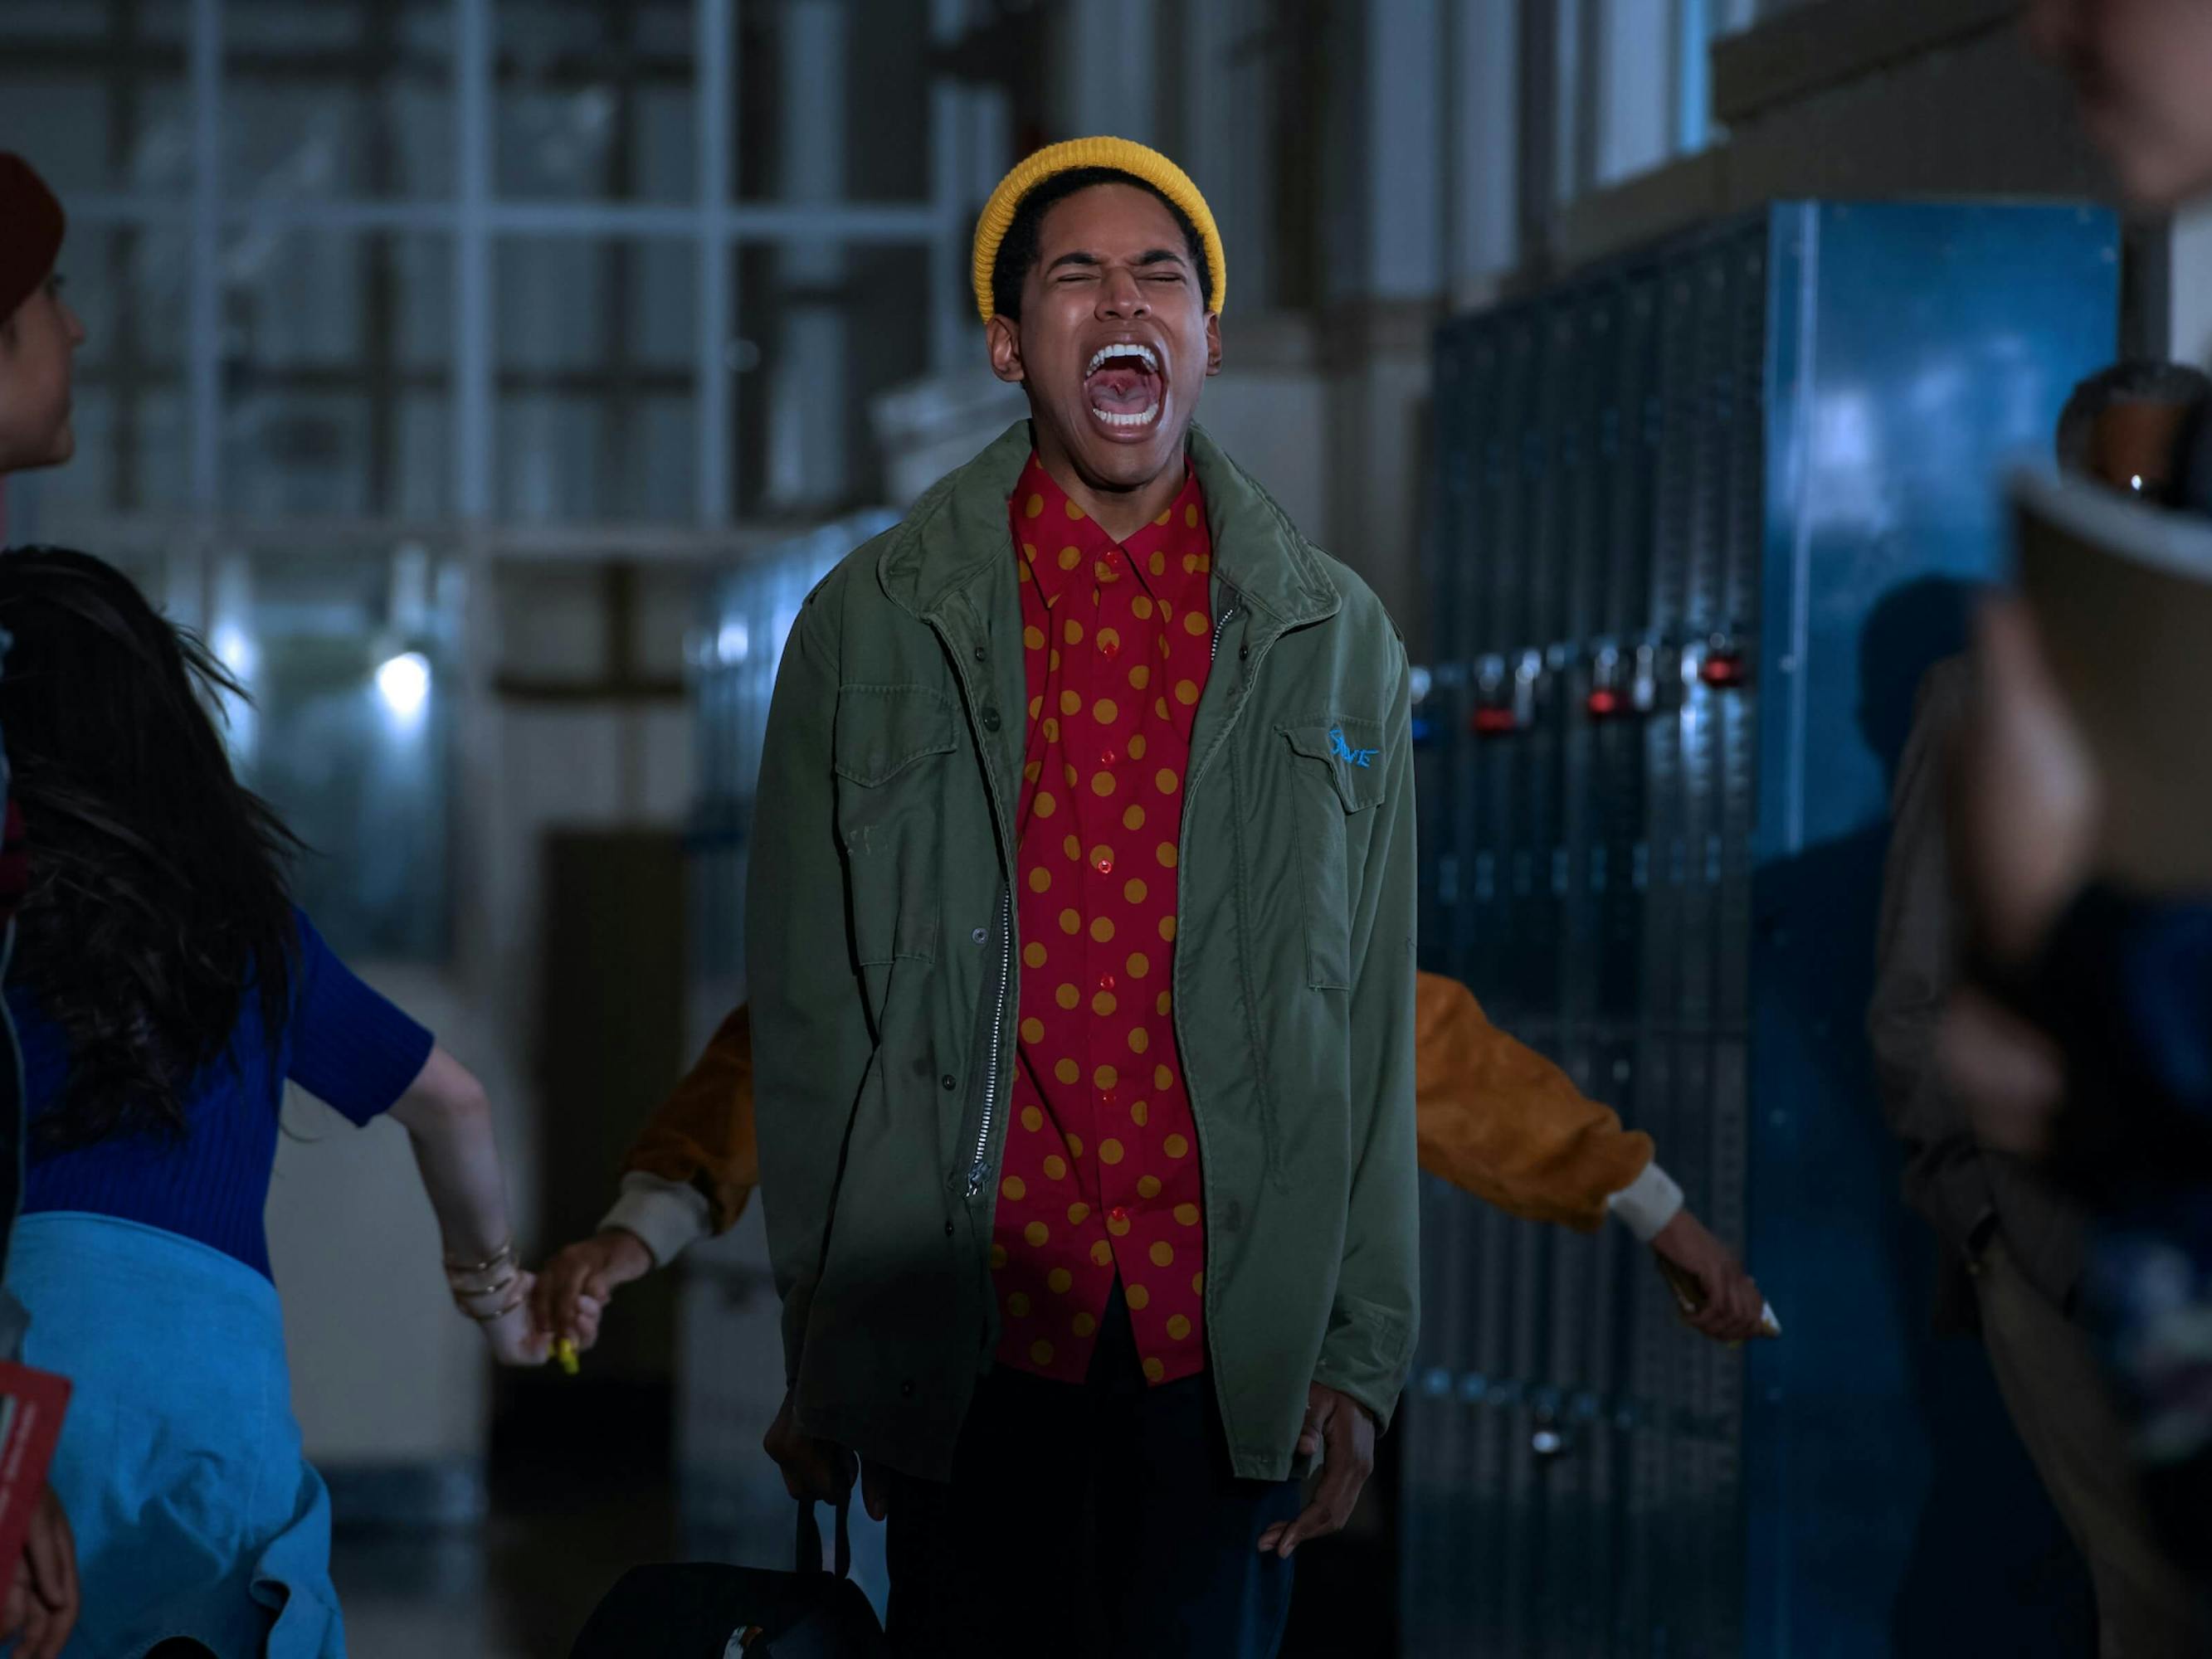 Harrison as Steven Harmon in Monster. He wears a red buttoned-down shirt, a green jacket, jeans, and a yellow beanie. Other kids stand in the hallways facing different directions. You can tell it’s a school by the lockers to his right.